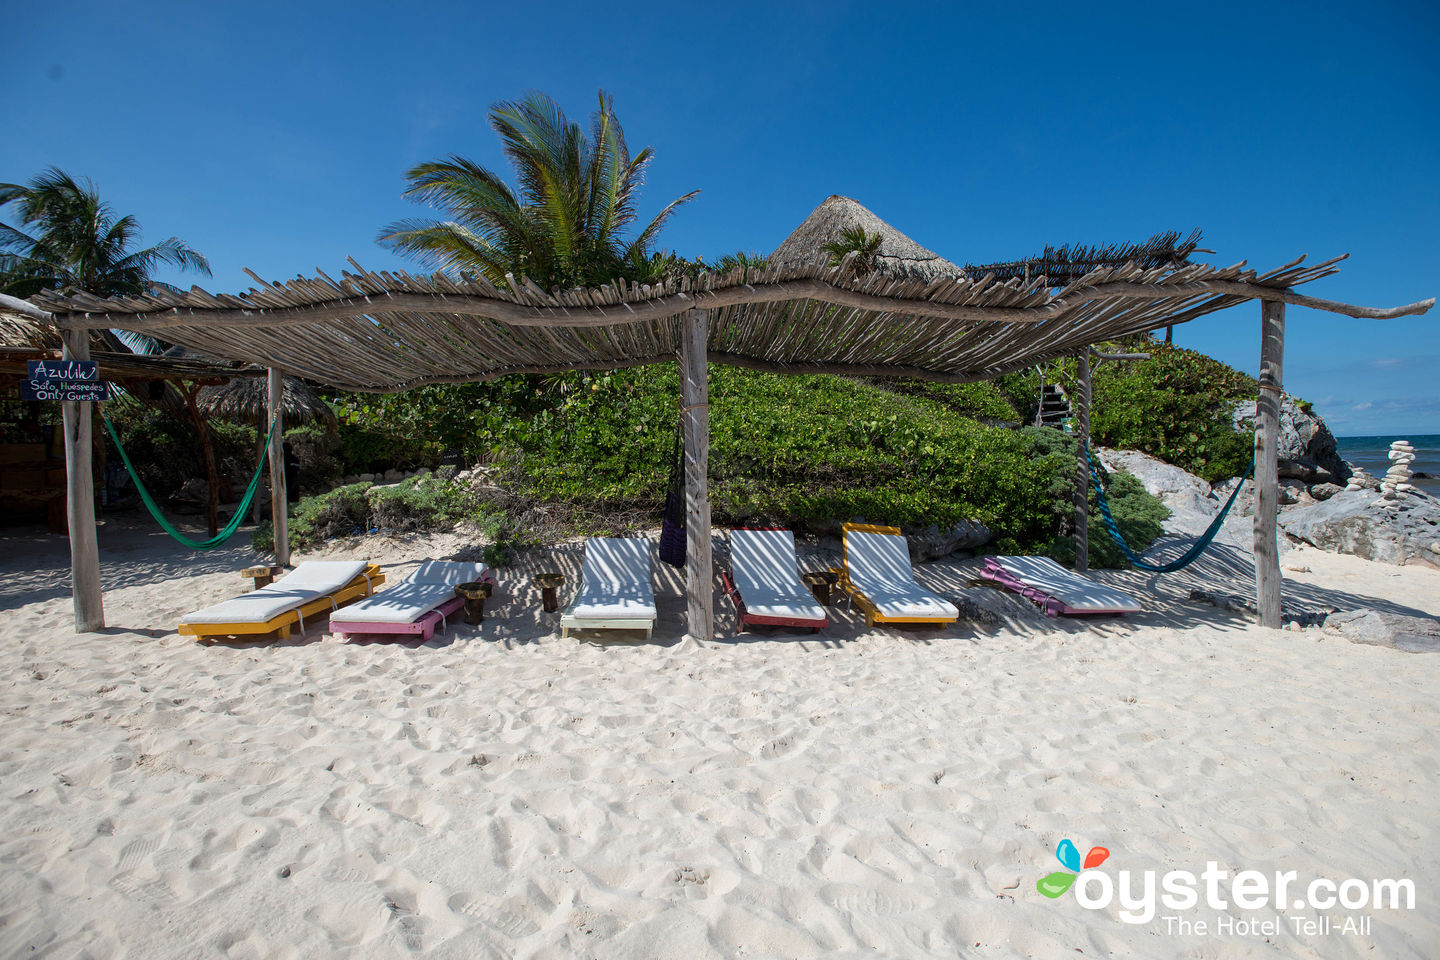 AZULIK Tulum Review: What To REALLY Expect If You Stay